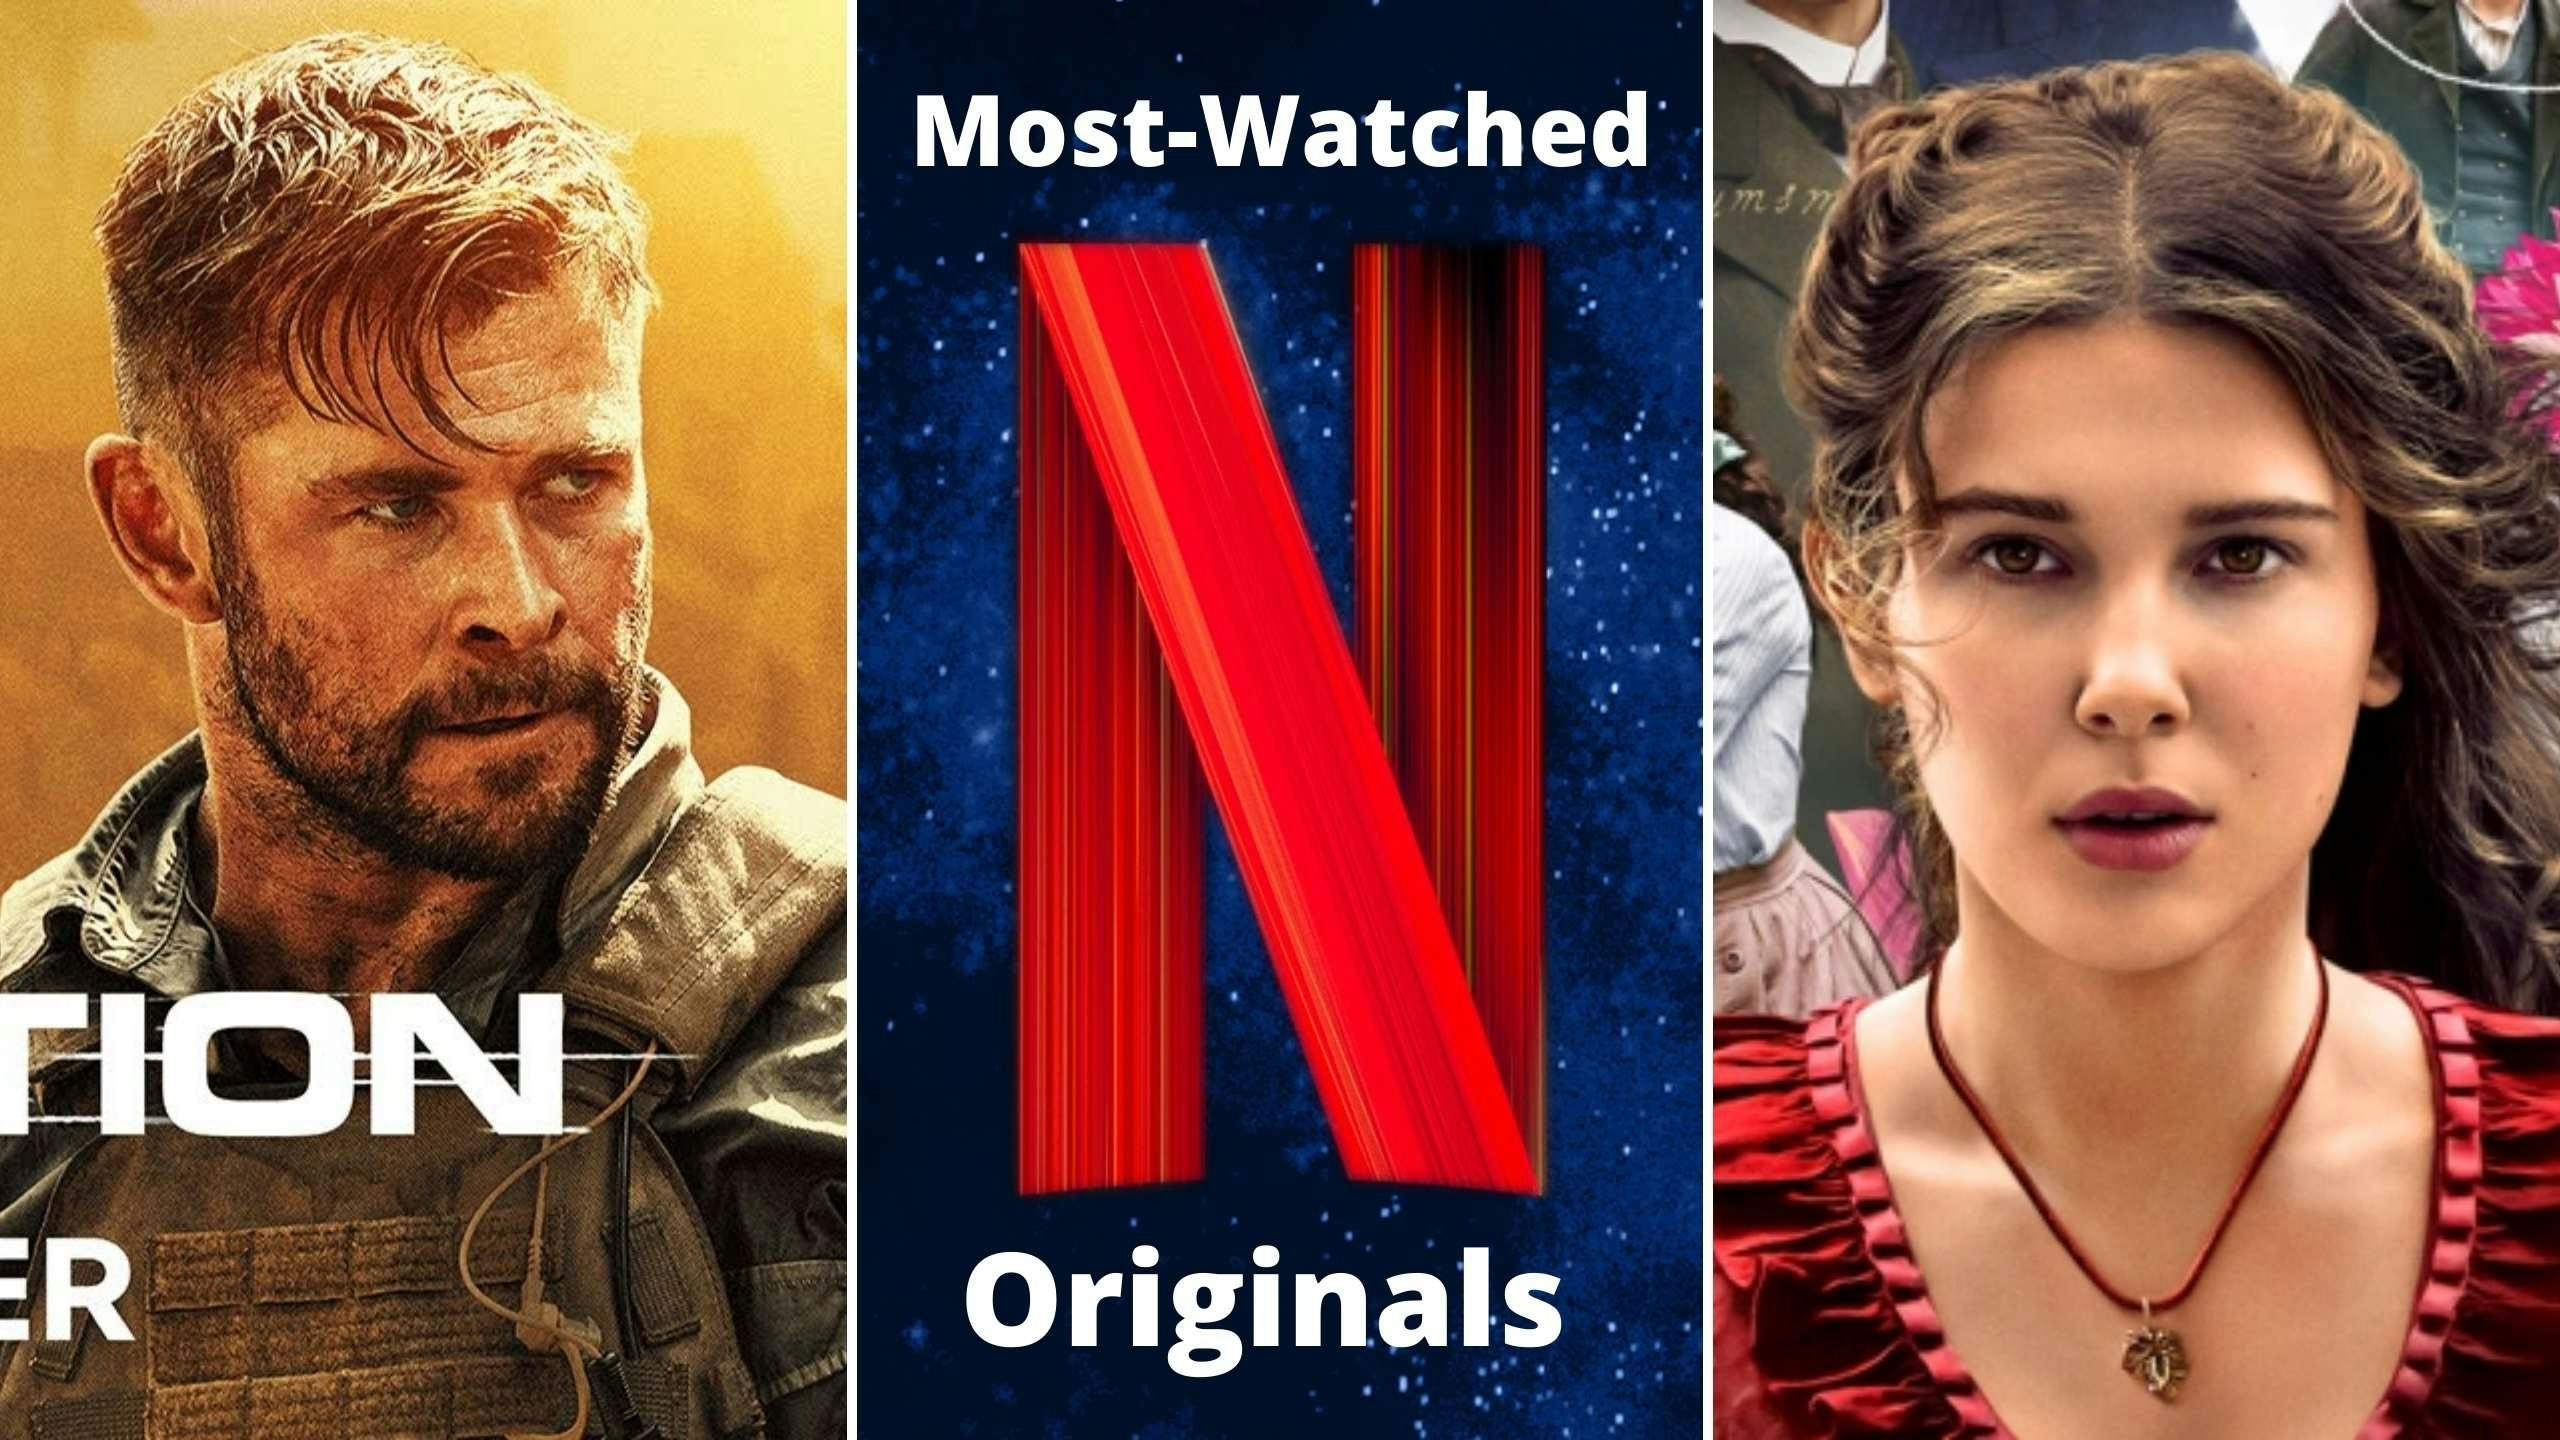 List of Netflix's Most-Watched Originals of all time - January 2021